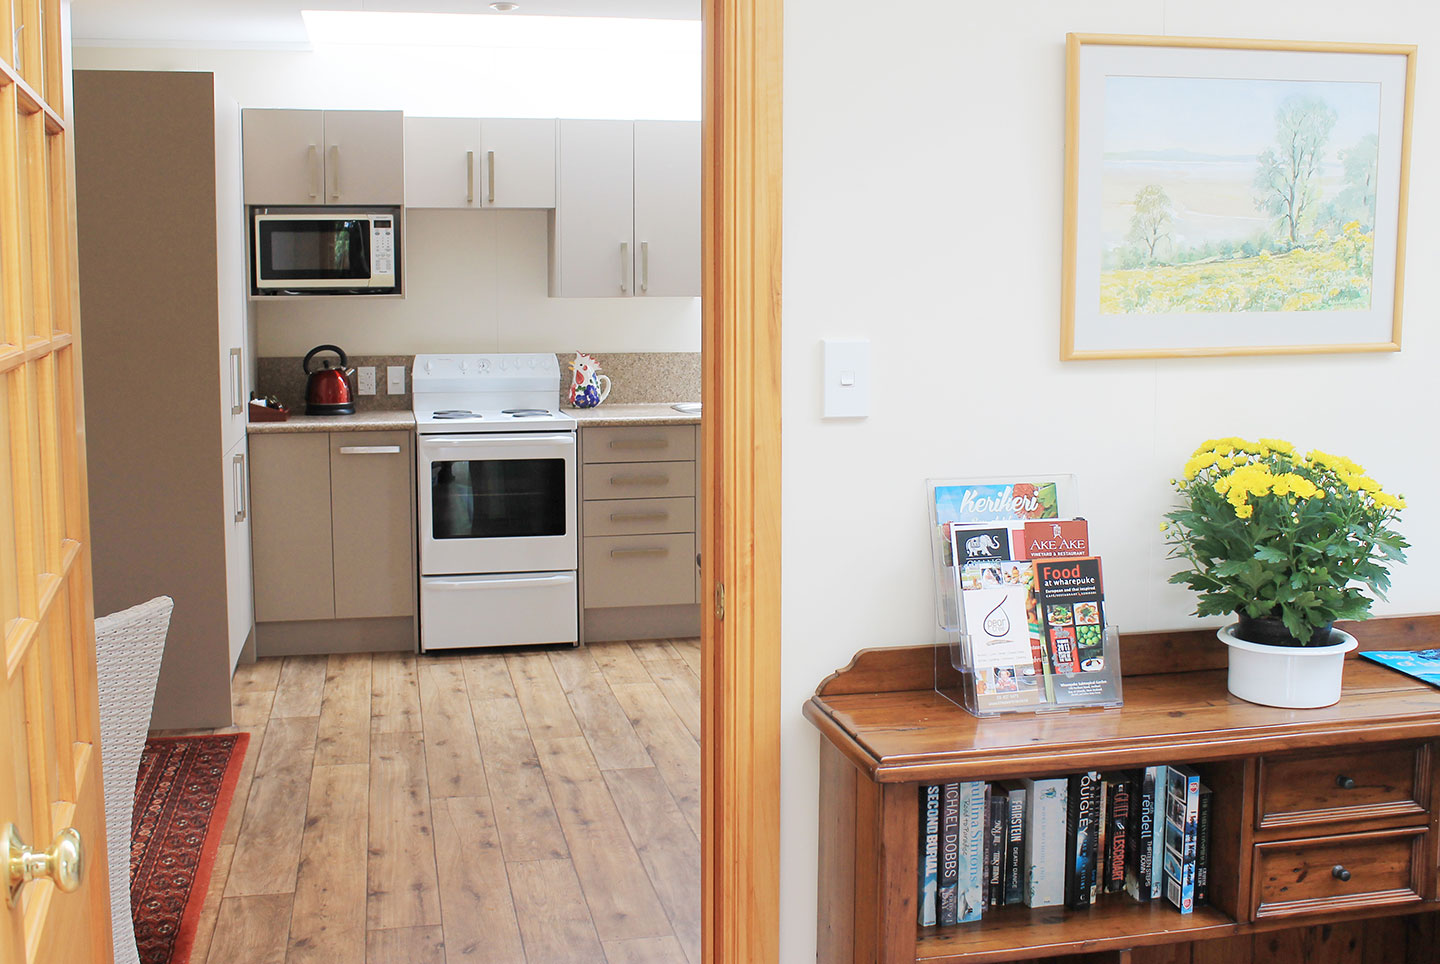 Fully equipped kitchen at the carriage house self catering accommodation kerikeri